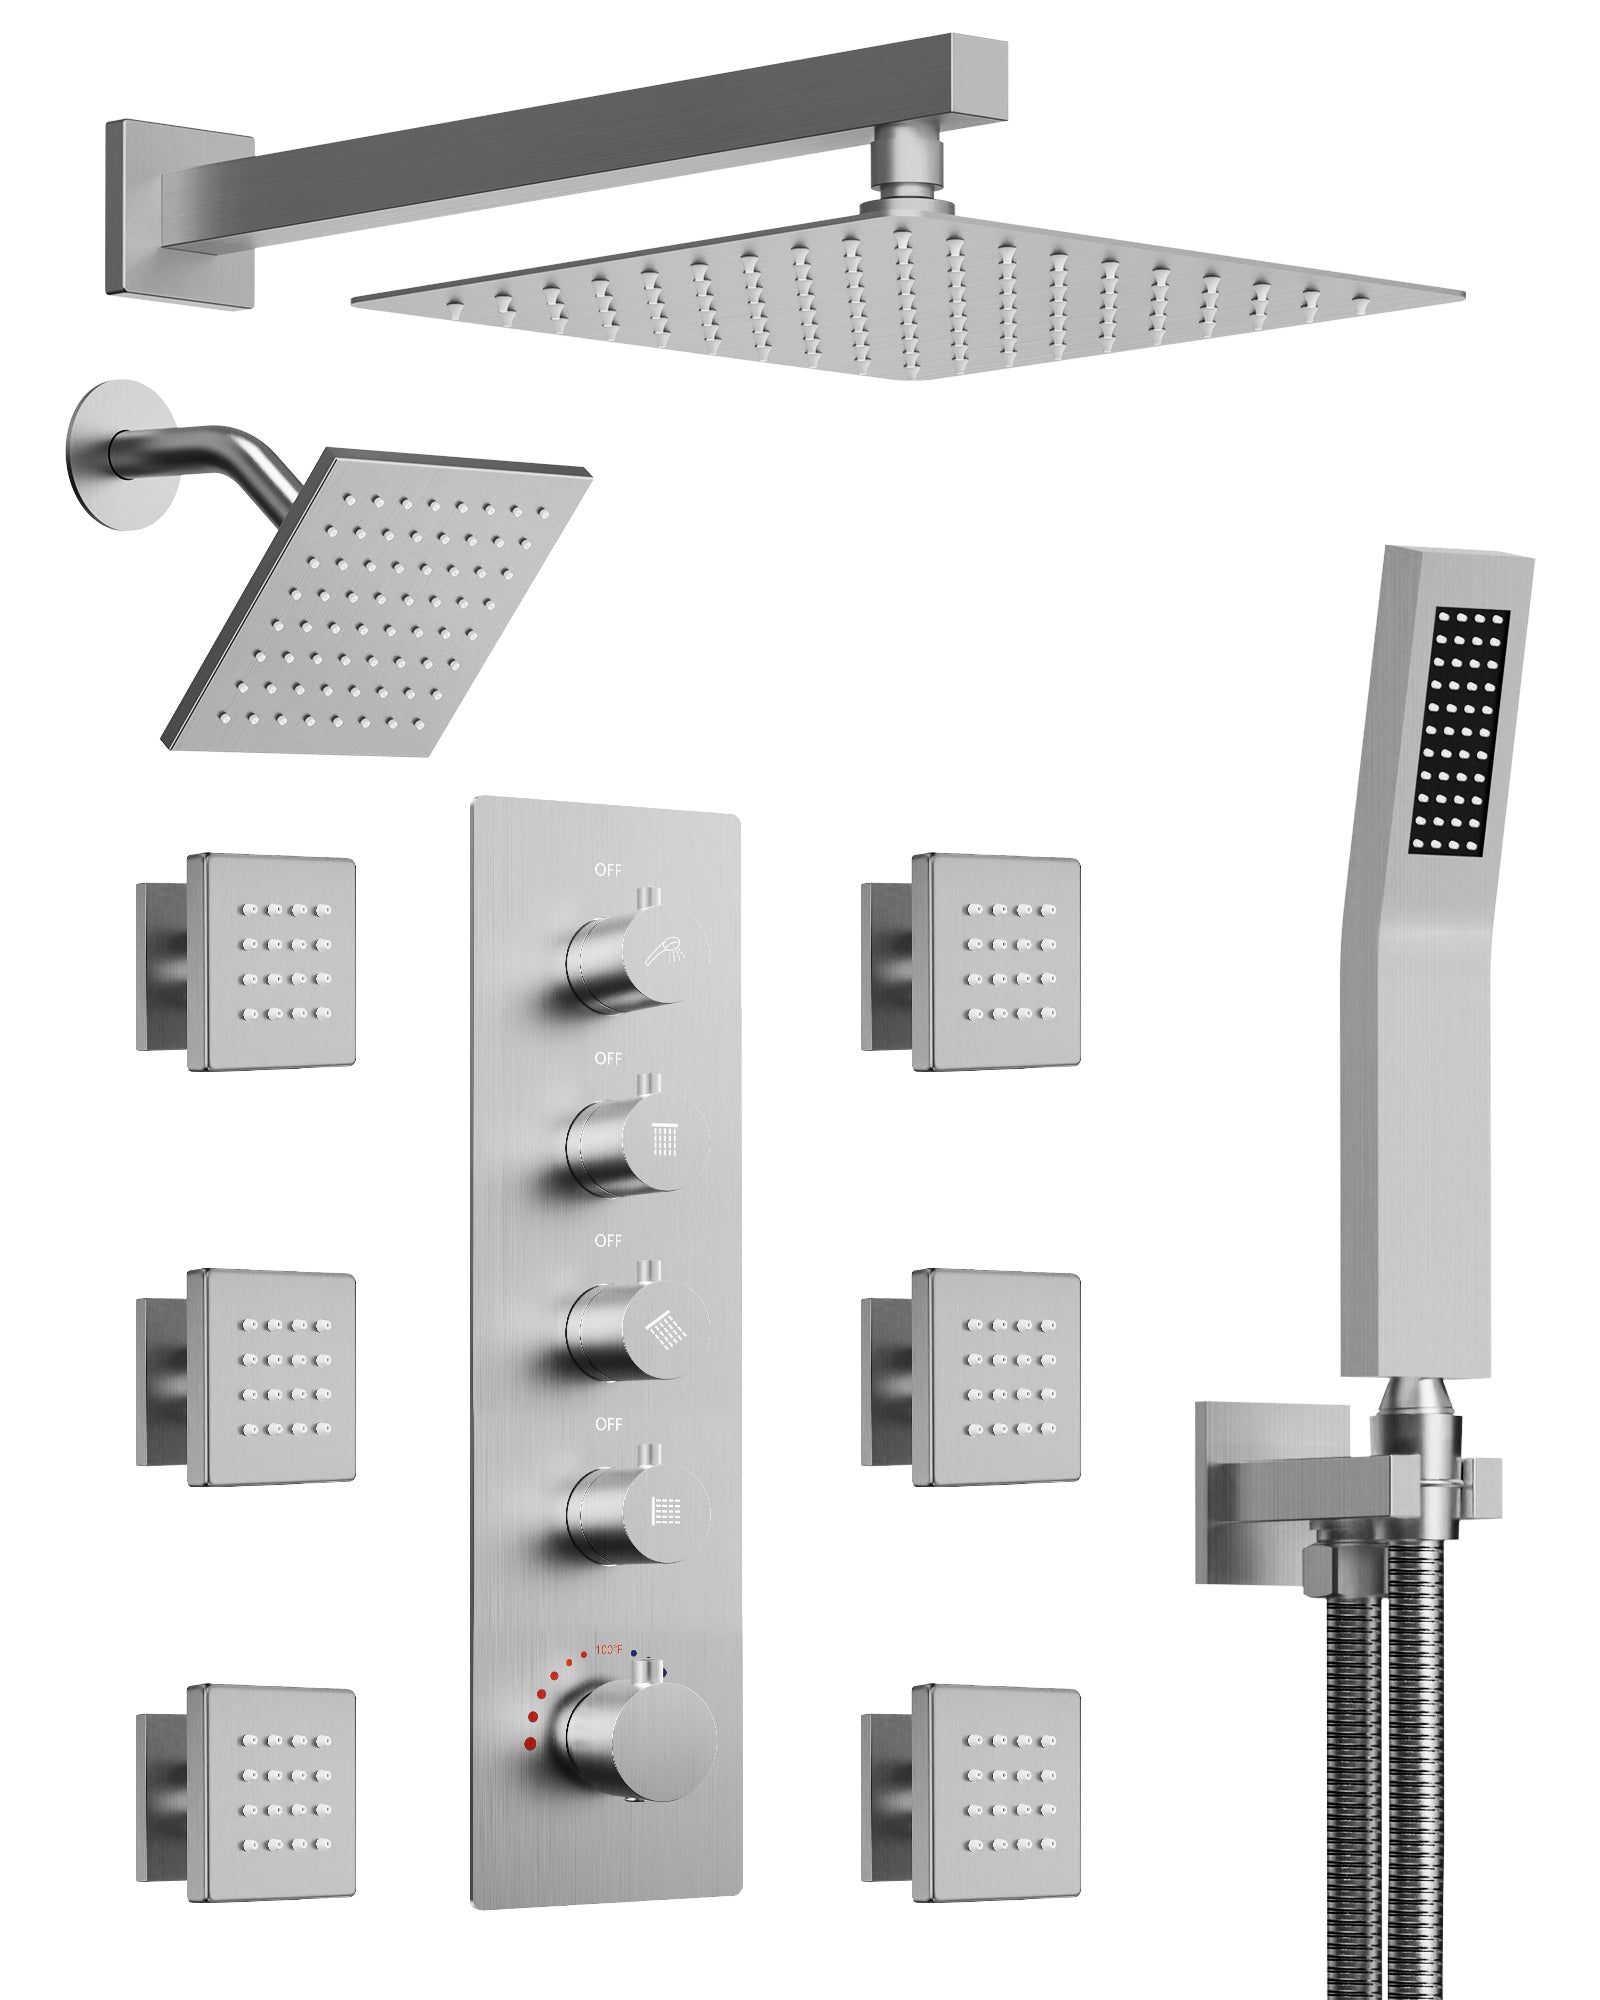 EVERSTEIN SFS-1064-NK16 16" High-Pressure Rainfall Complete Shower System with Rough-in Valve